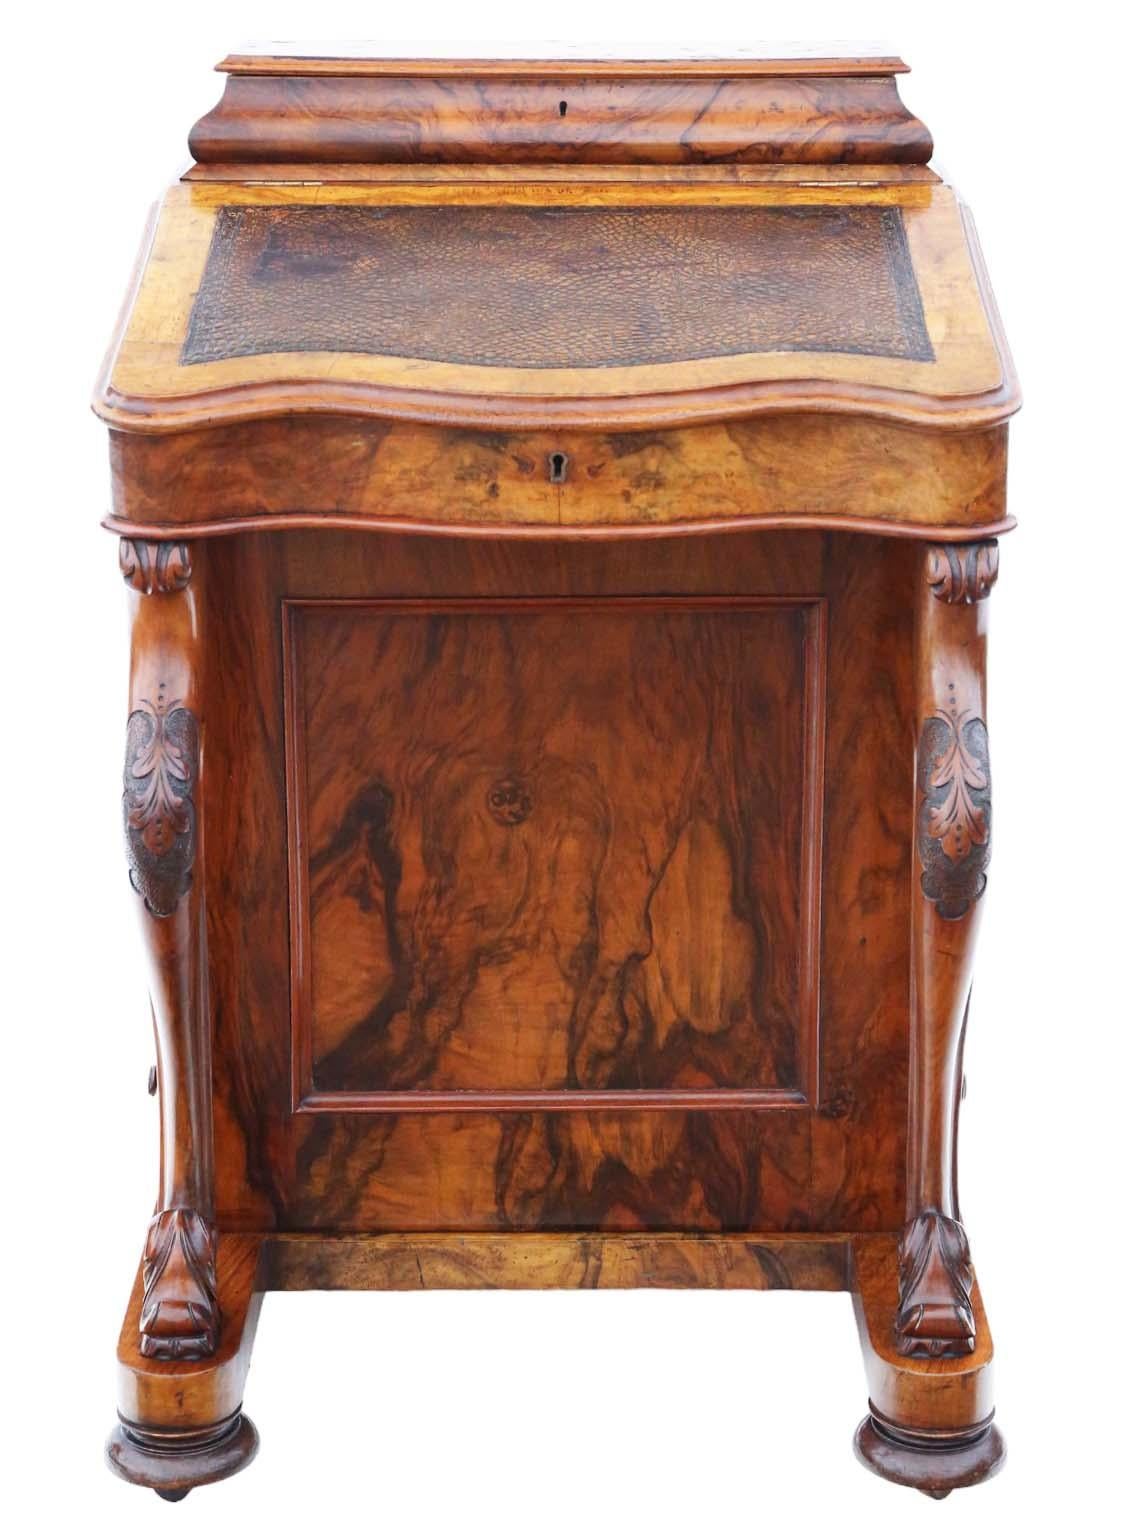 Presenting an exquisite Victorian Burr and Figured Walnut Davenport Writing Table Desk dating back to approximately 1870. This charming piece exudes age and character, making it a rare and sought-after find for antique enthusiasts.

Featuring period